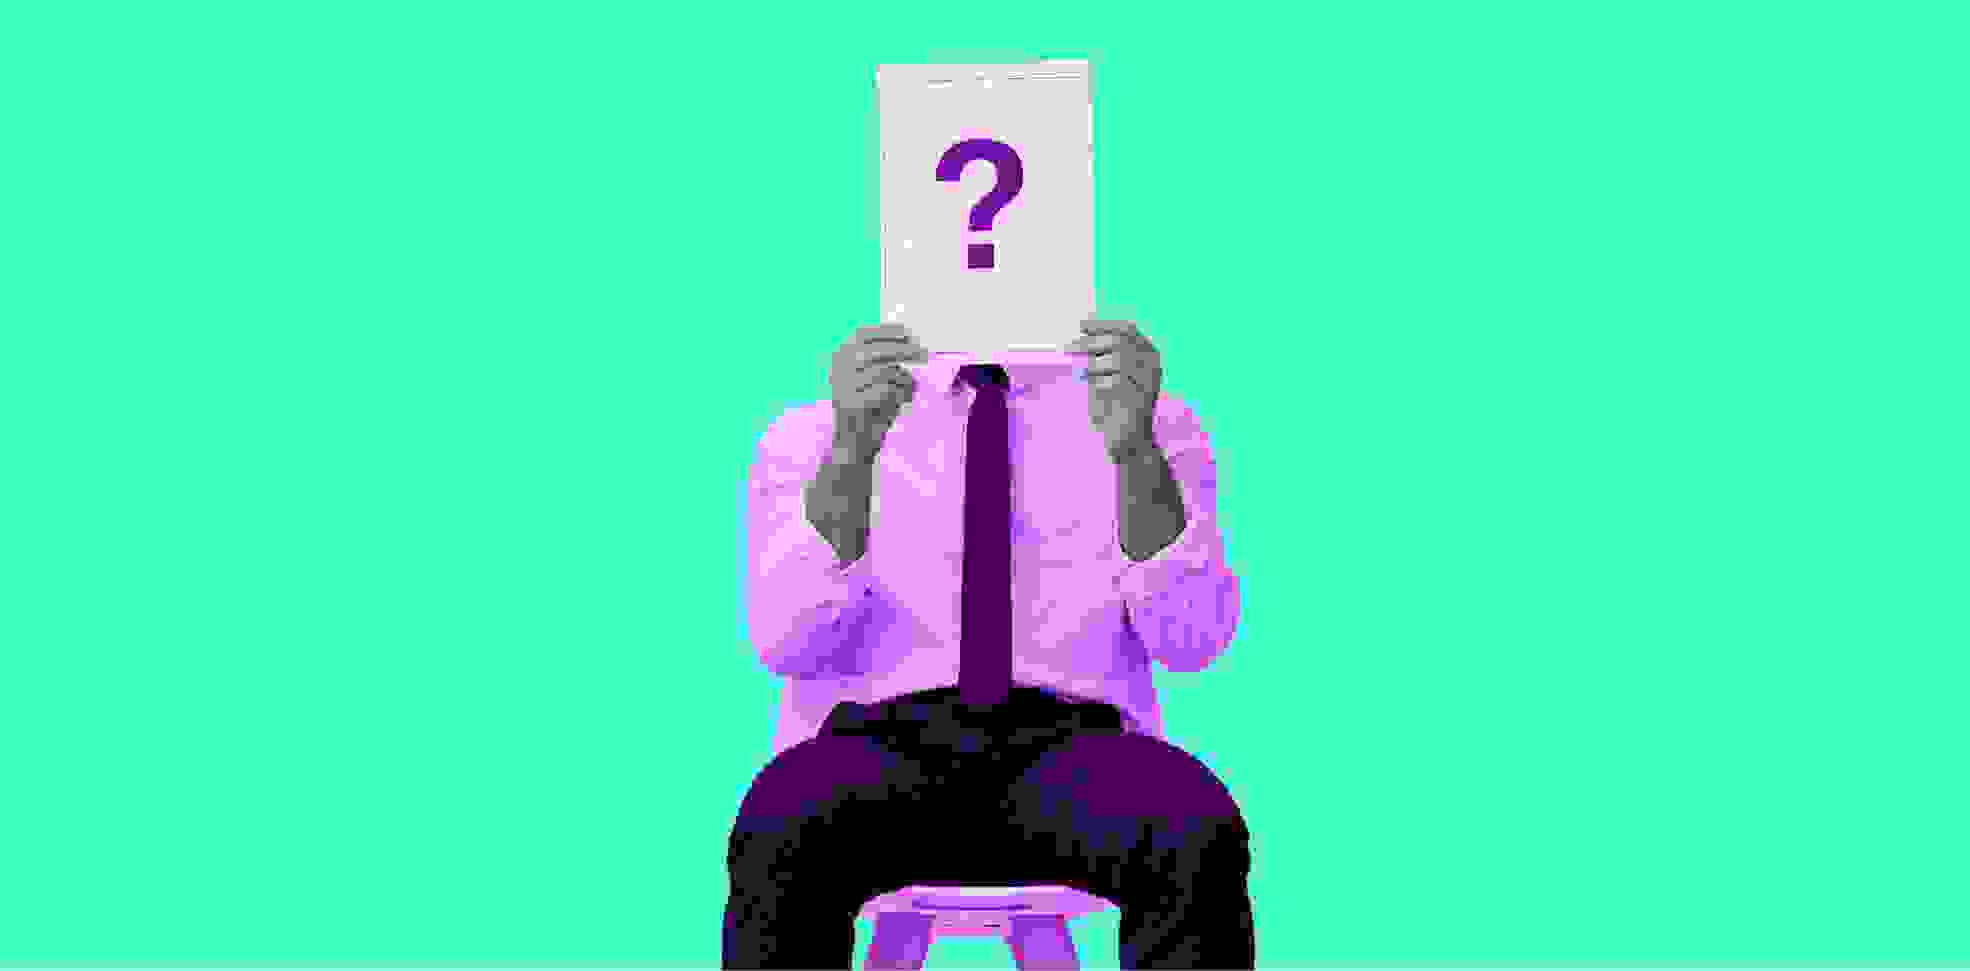 man sitting on a chair holding a sheet of paper with a question mark, on a green background